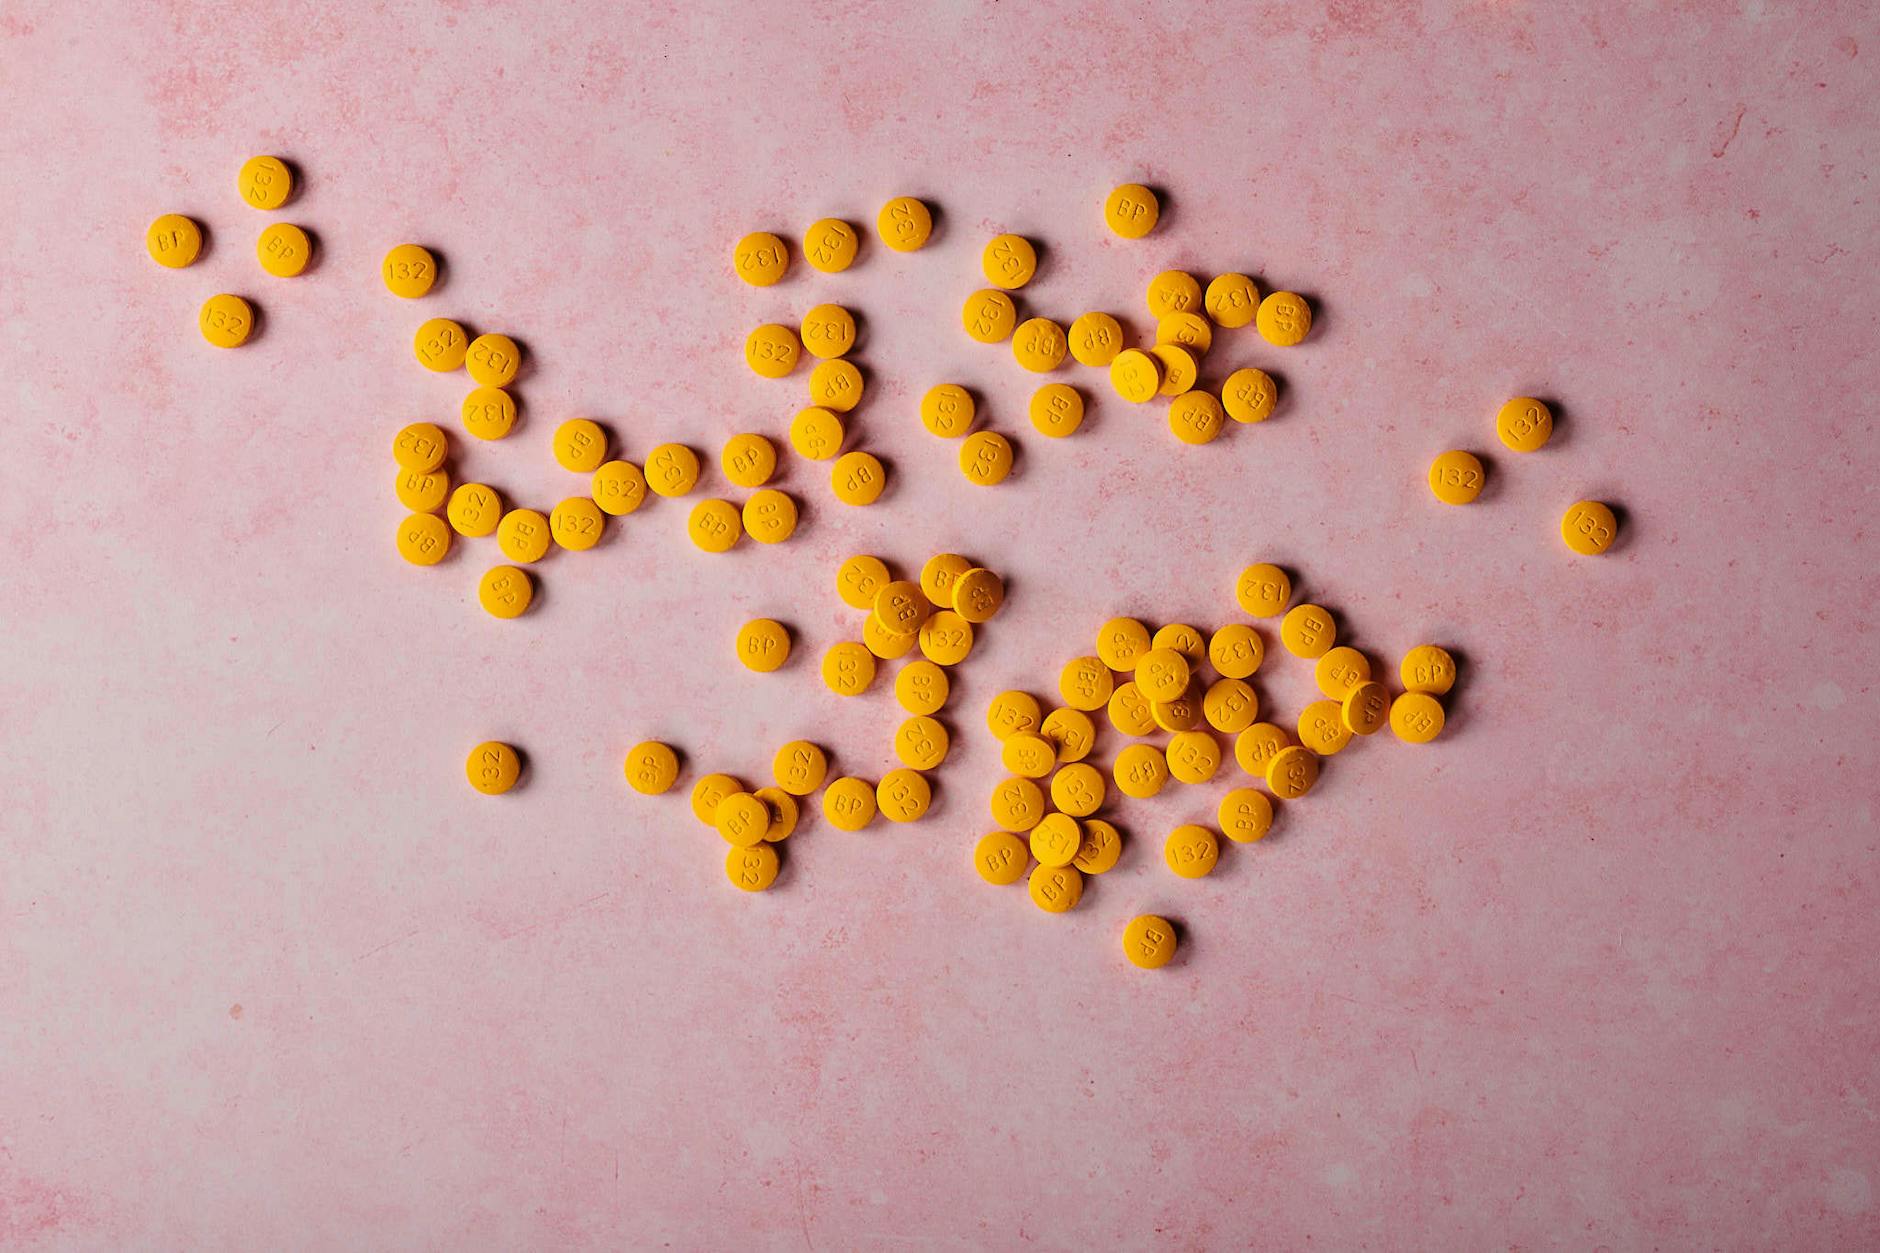 Yellow Beelith Pills Lying against a Pink Background